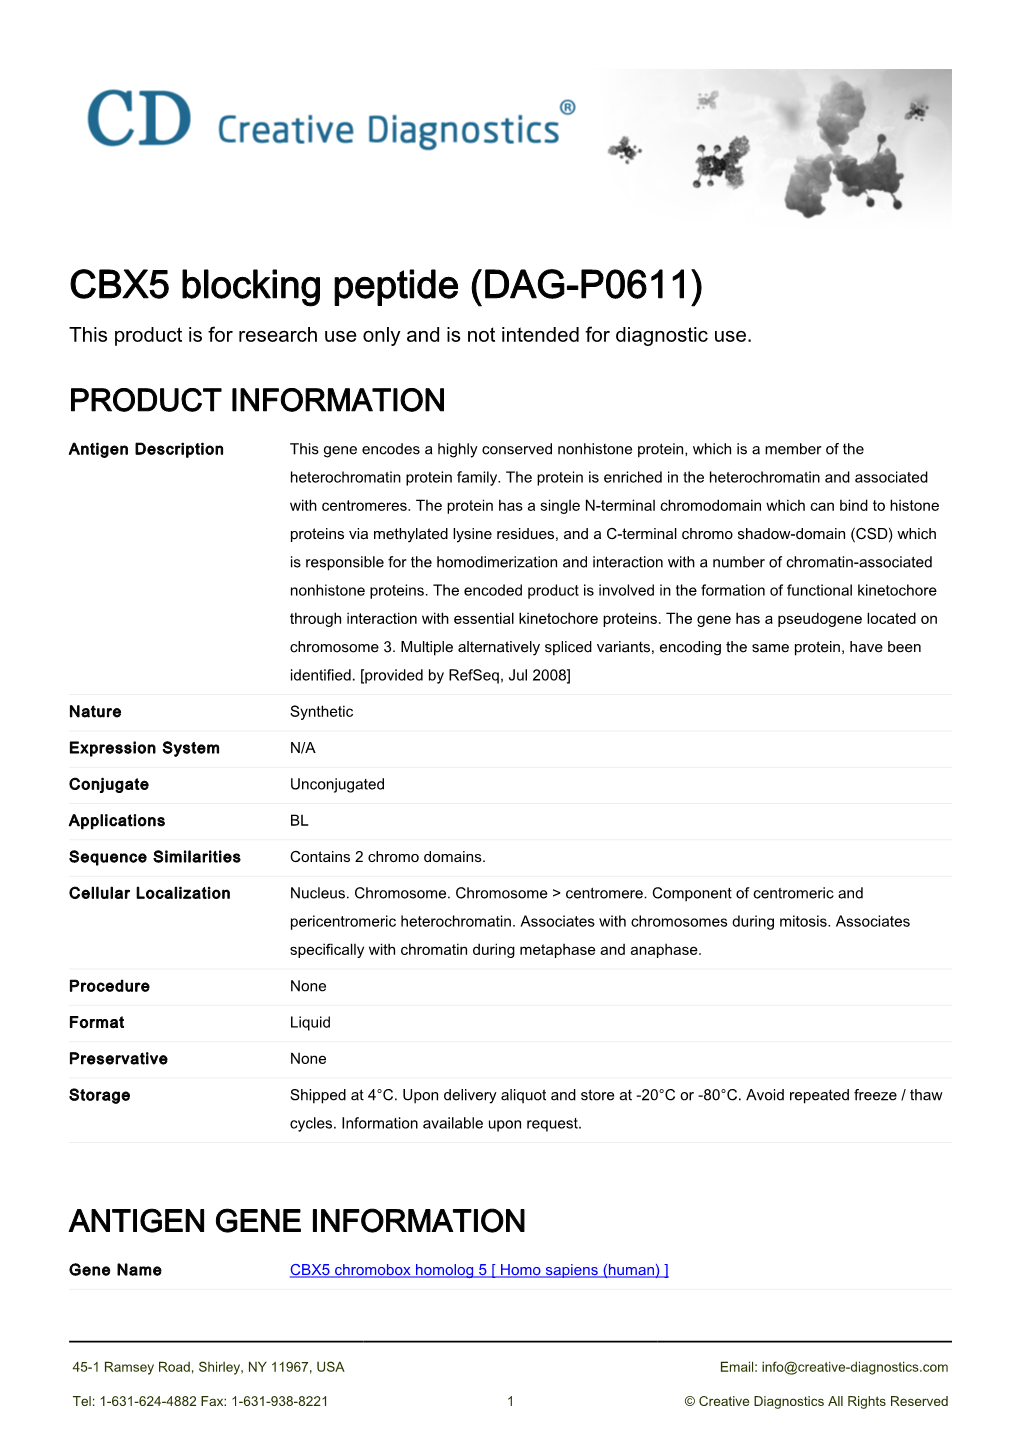 CBX5 Blocking Peptide (DAG-P0611) This Product Is for Research Use Only and Is Not Intended for Diagnostic Use